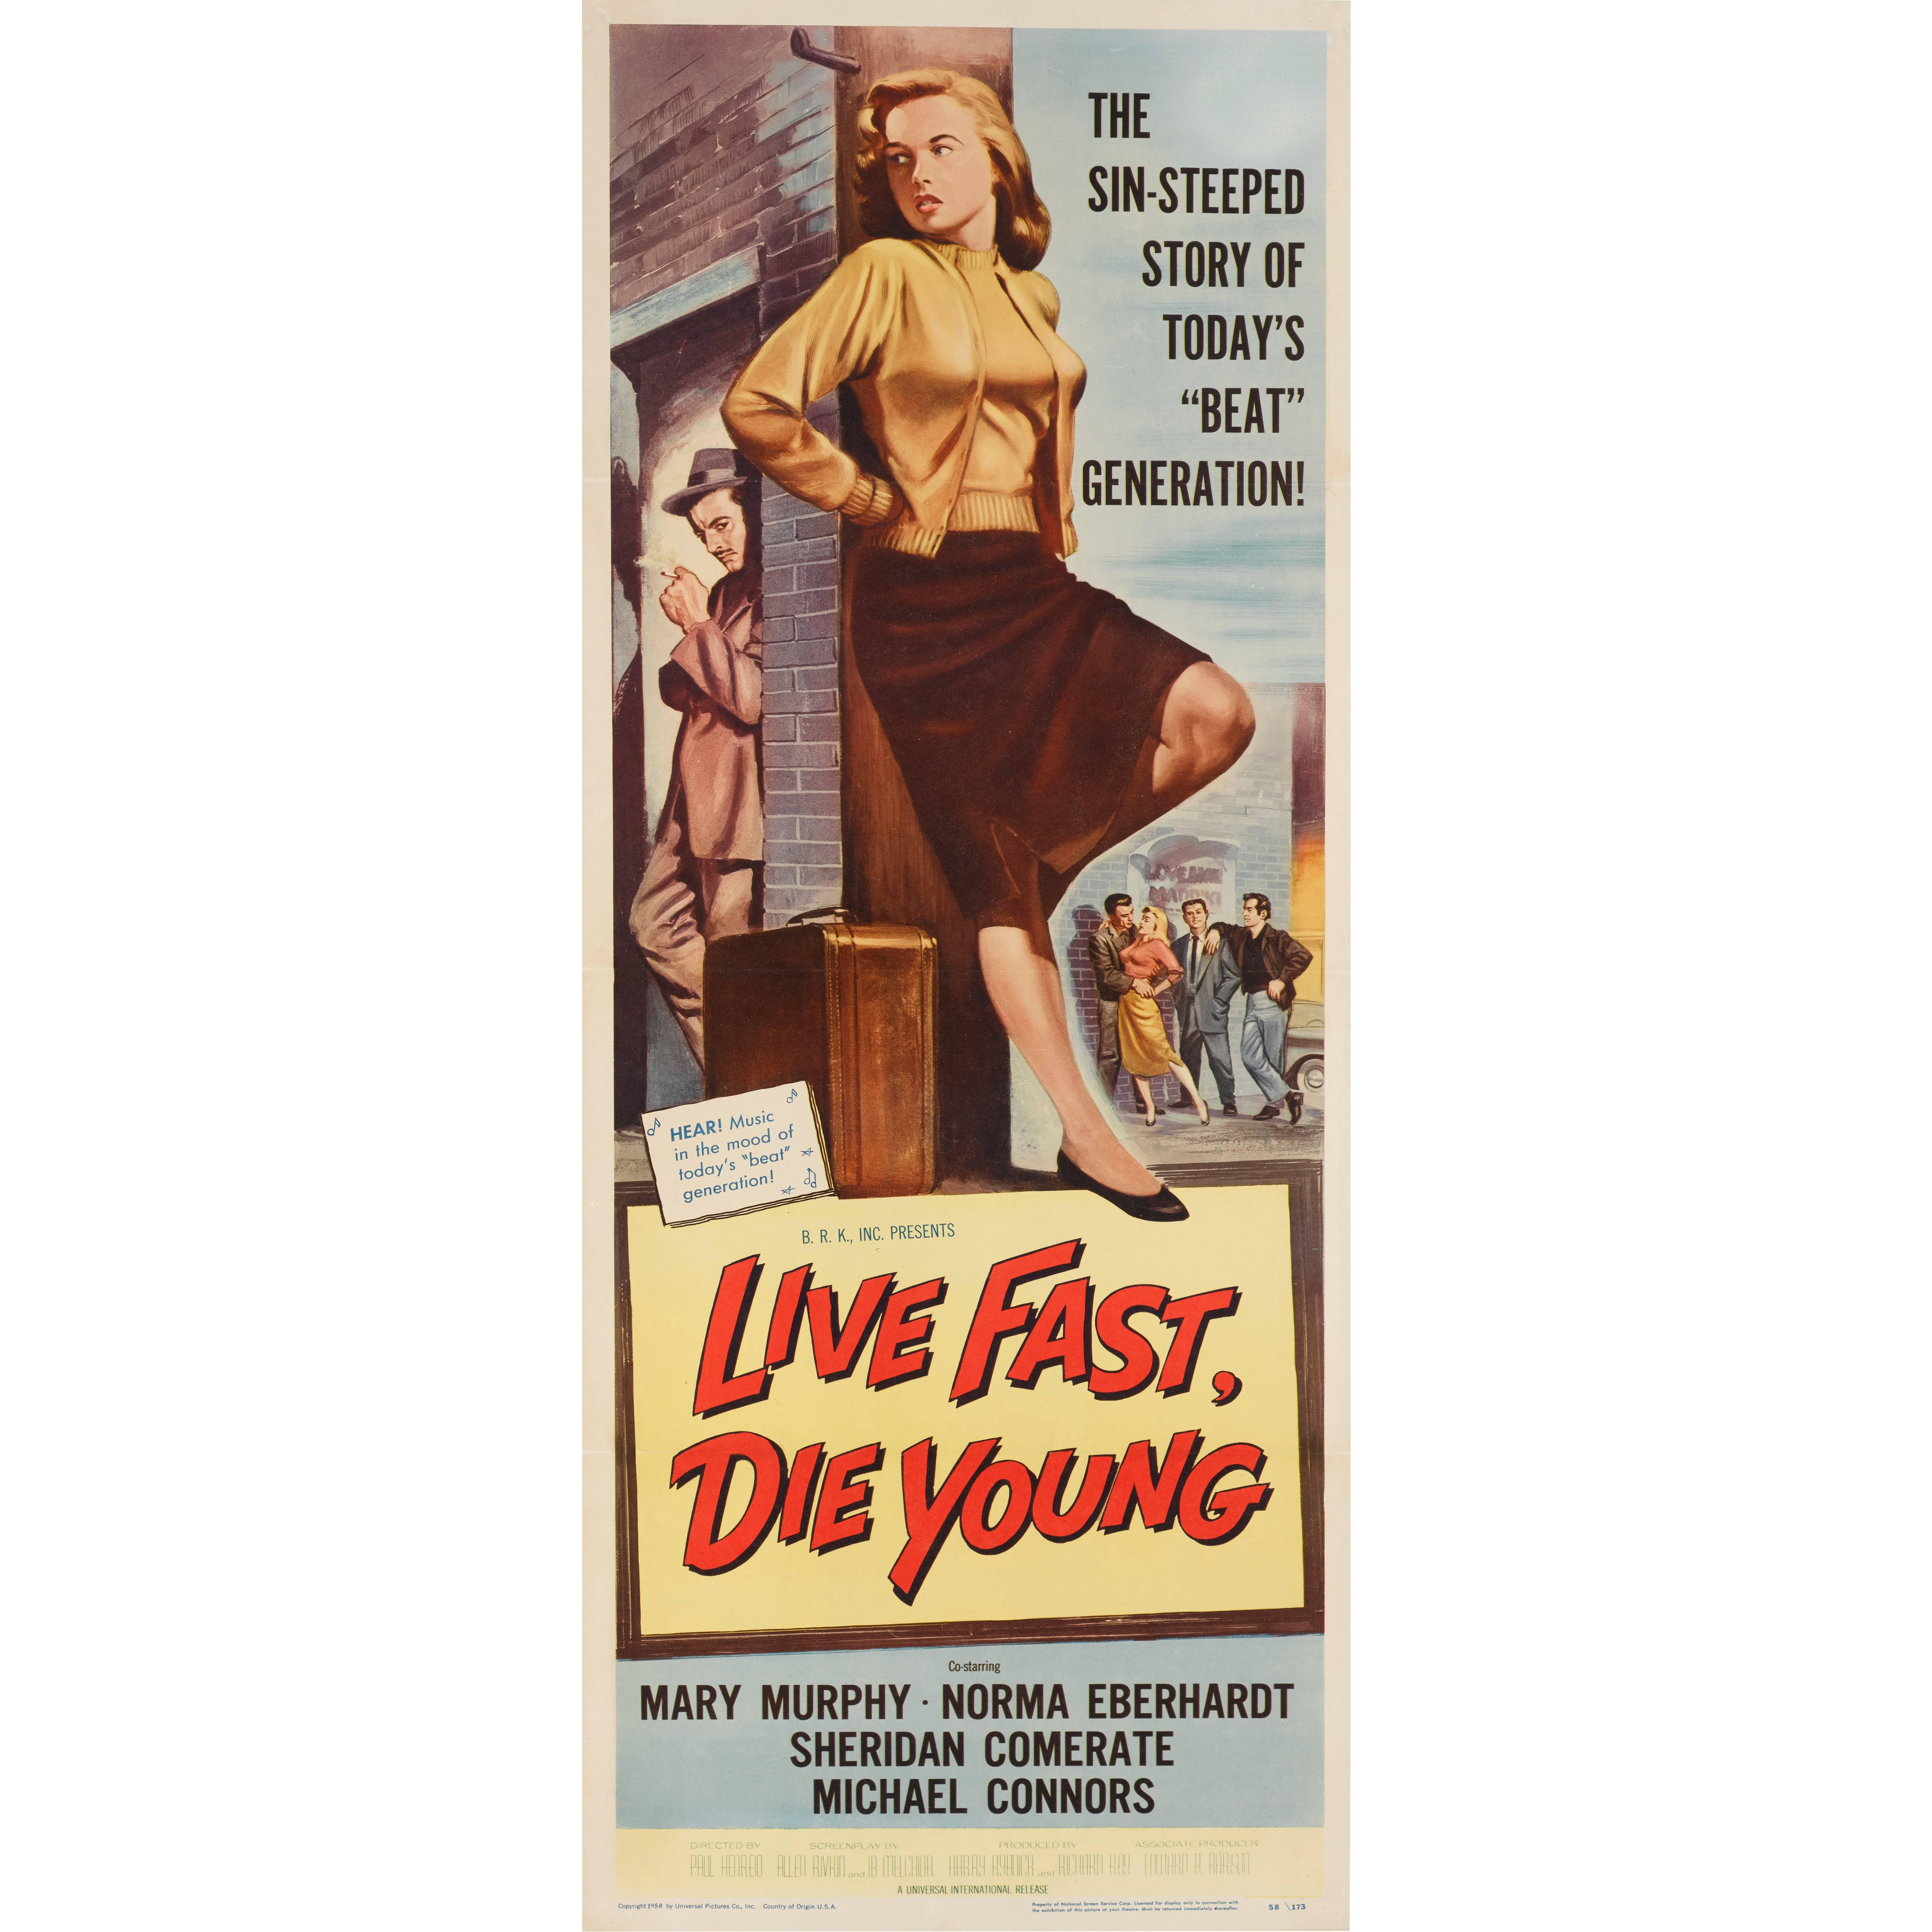 "Live Fast, Die Young" Original US Film Poster For Sale